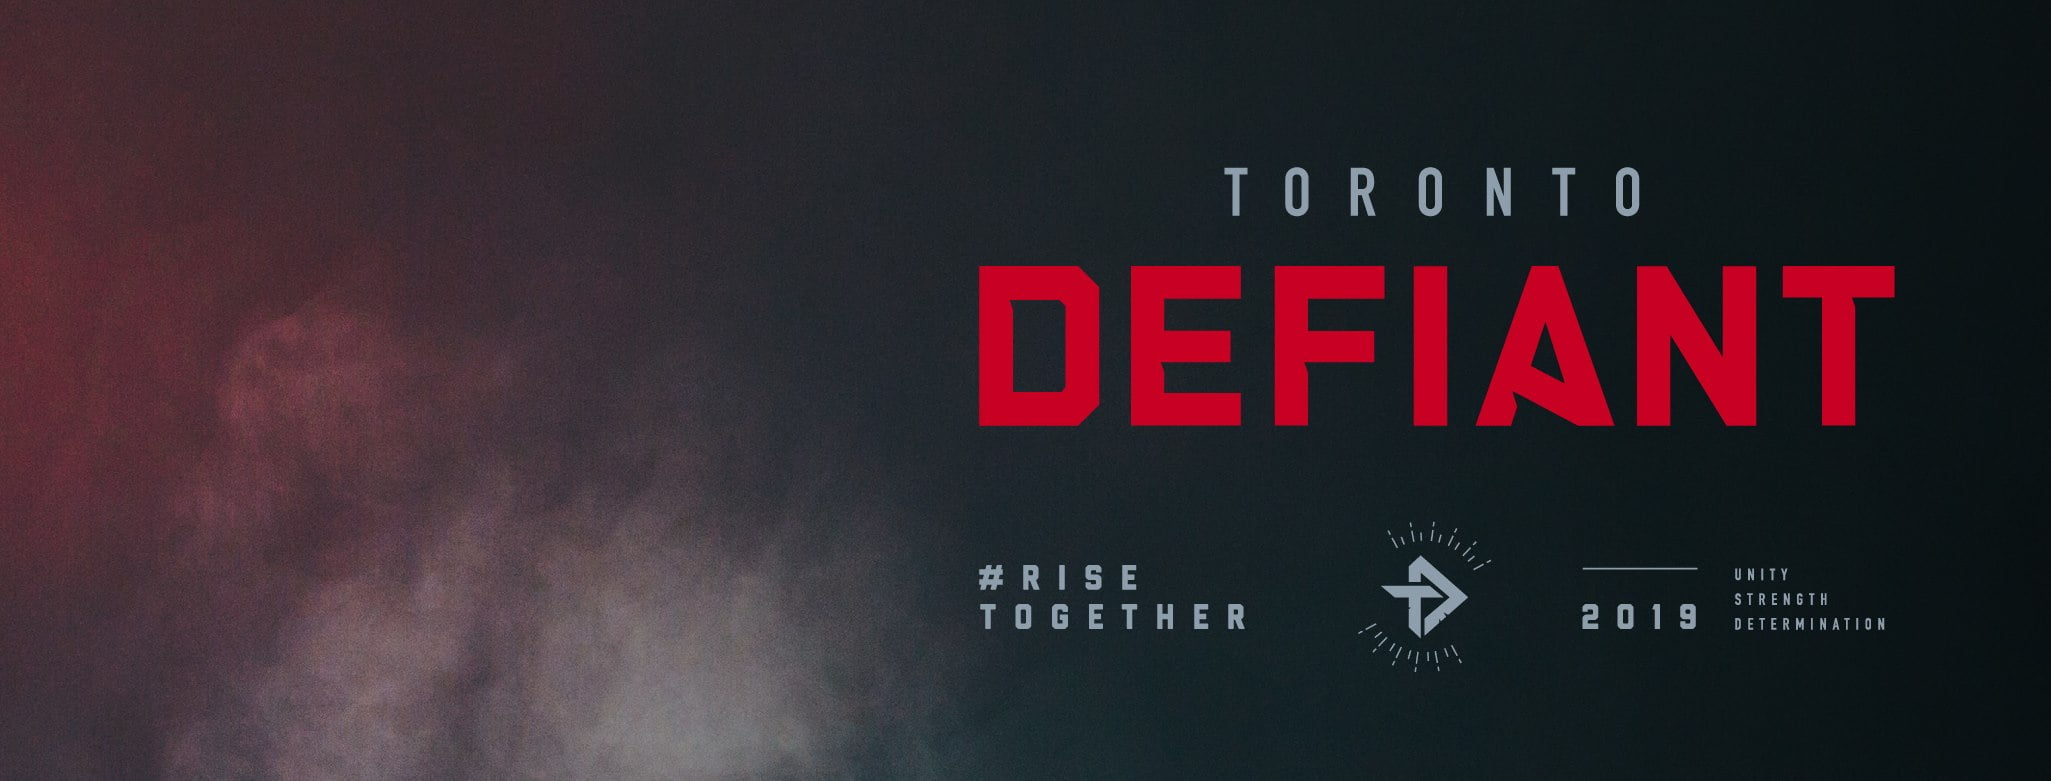 Toronto Defiant Launches As Canada's Newest Professional Esports Team 12